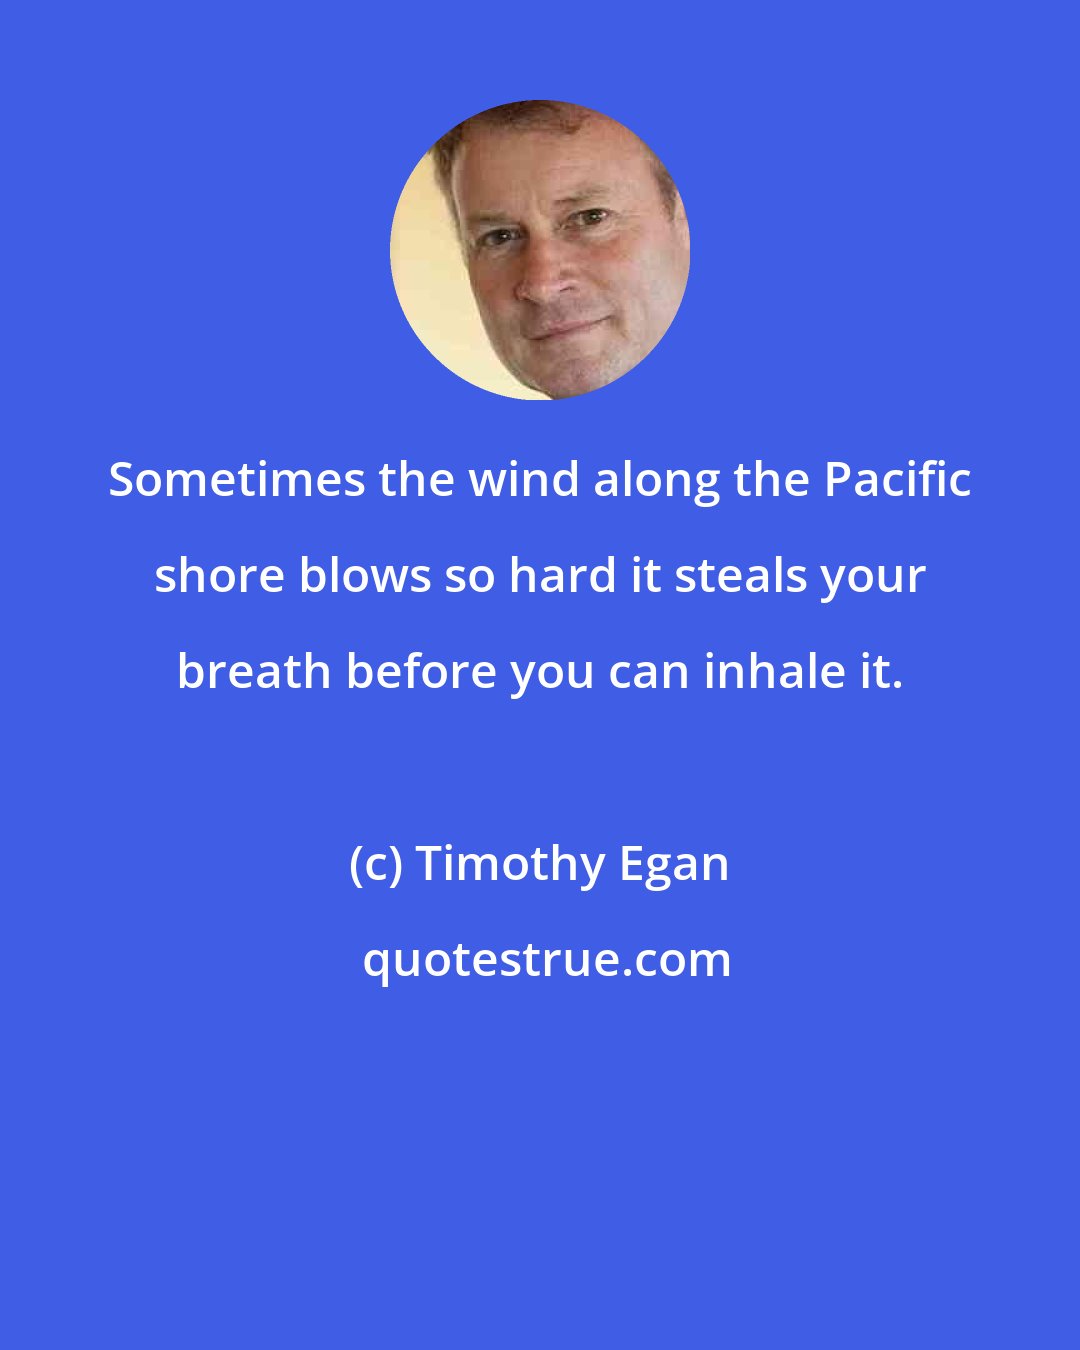 Timothy Egan: Sometimes the wind along the Pacific shore blows so hard it steals your breath before you can inhale it.